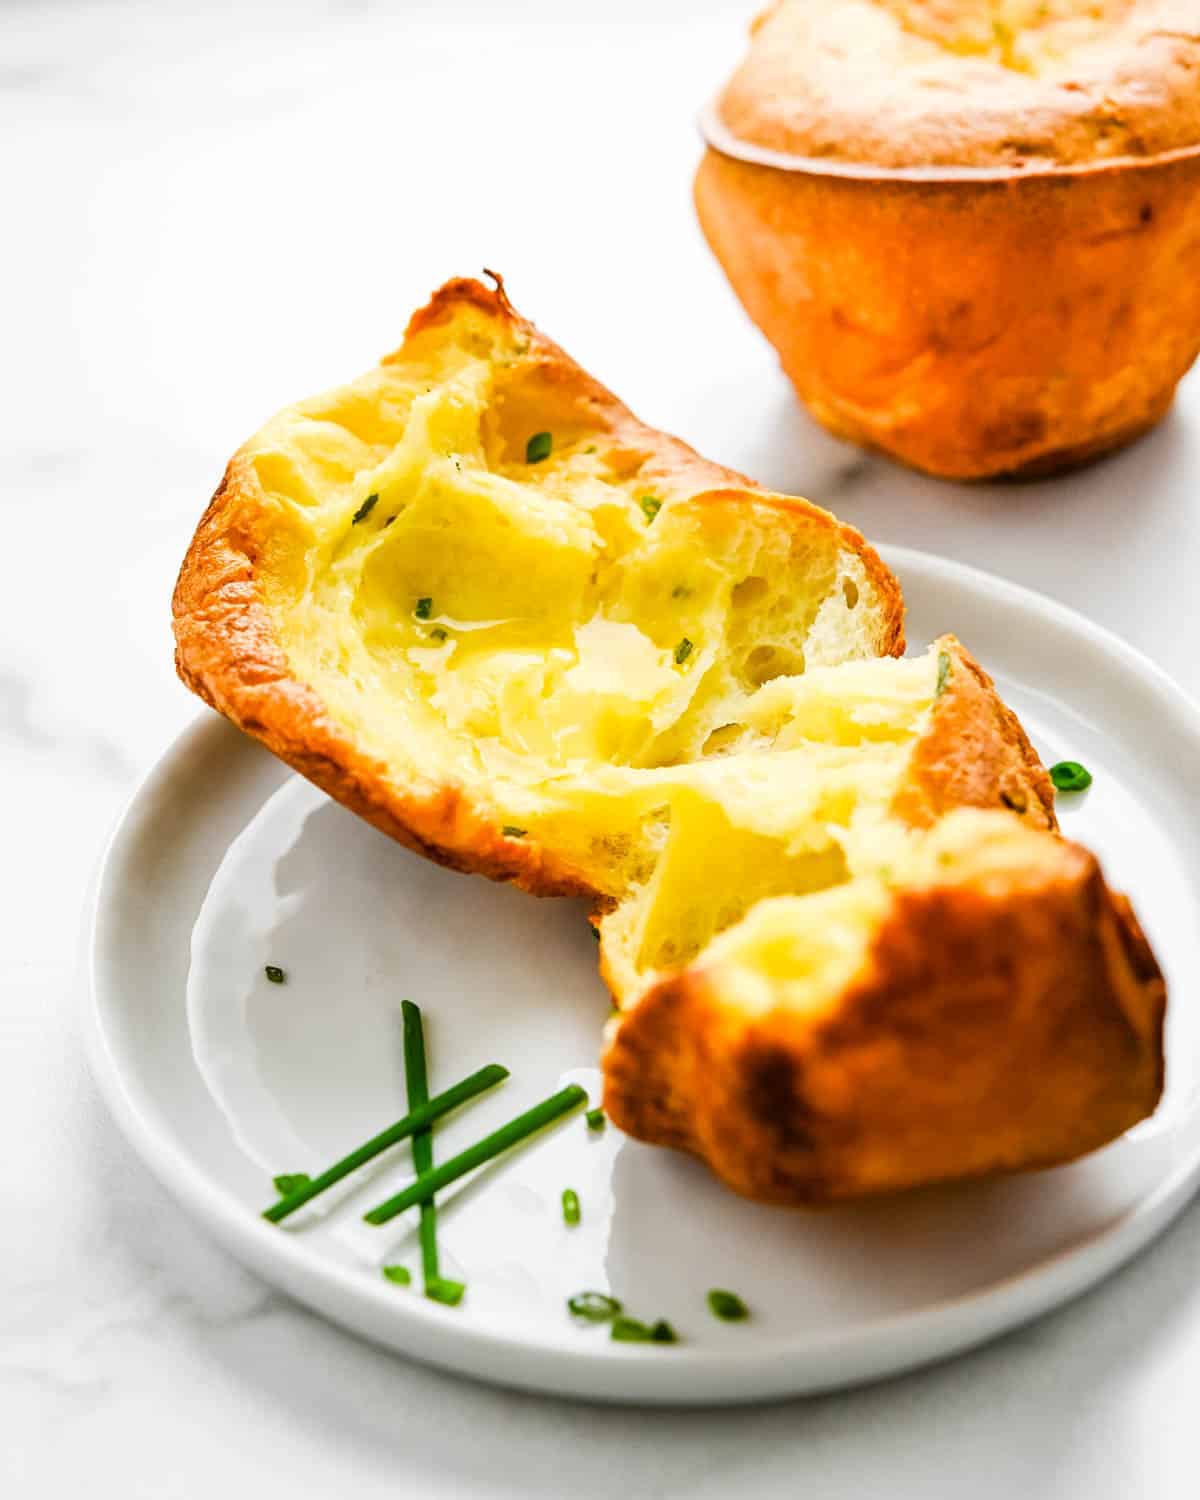 Breaking open a popover and adding butter to melt. 
